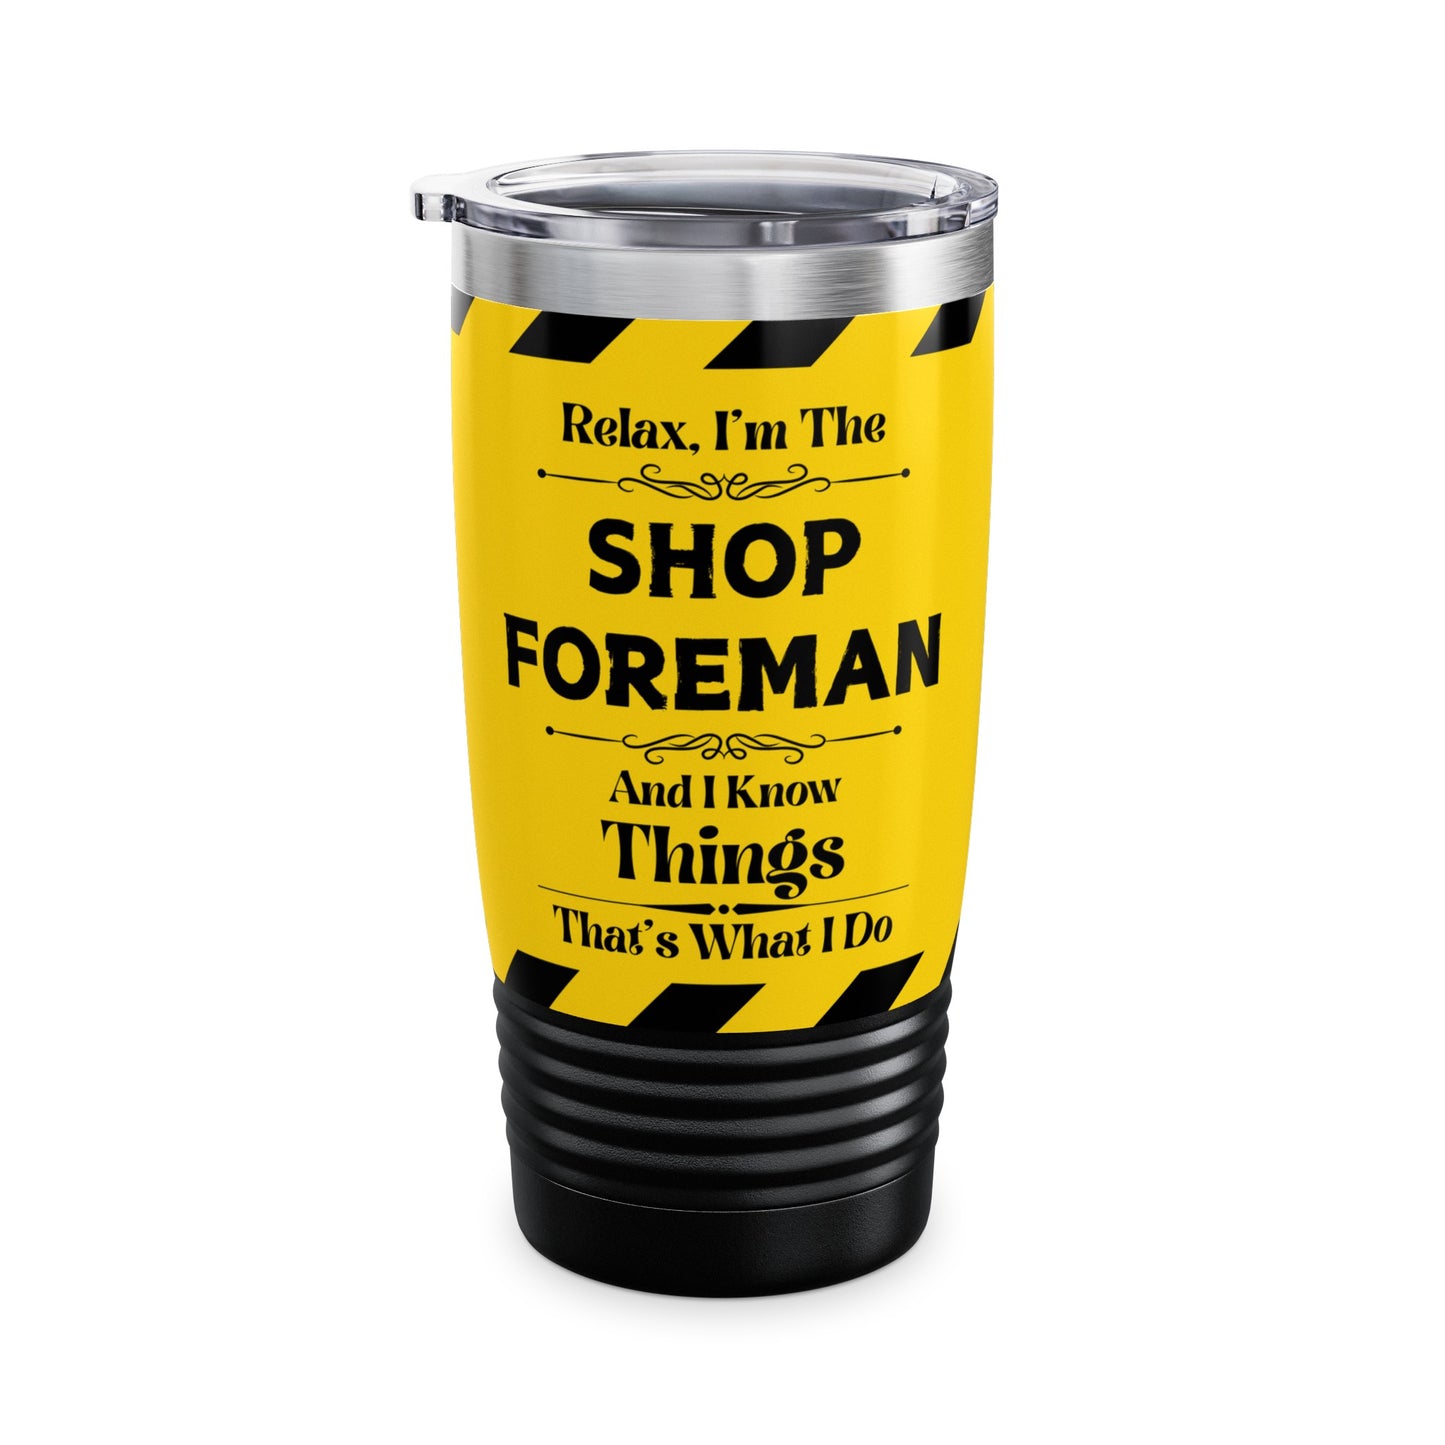 Relax, I'm The SHOP FOREMAN, And I Know Things - Ringneck Tumbler, 20oz